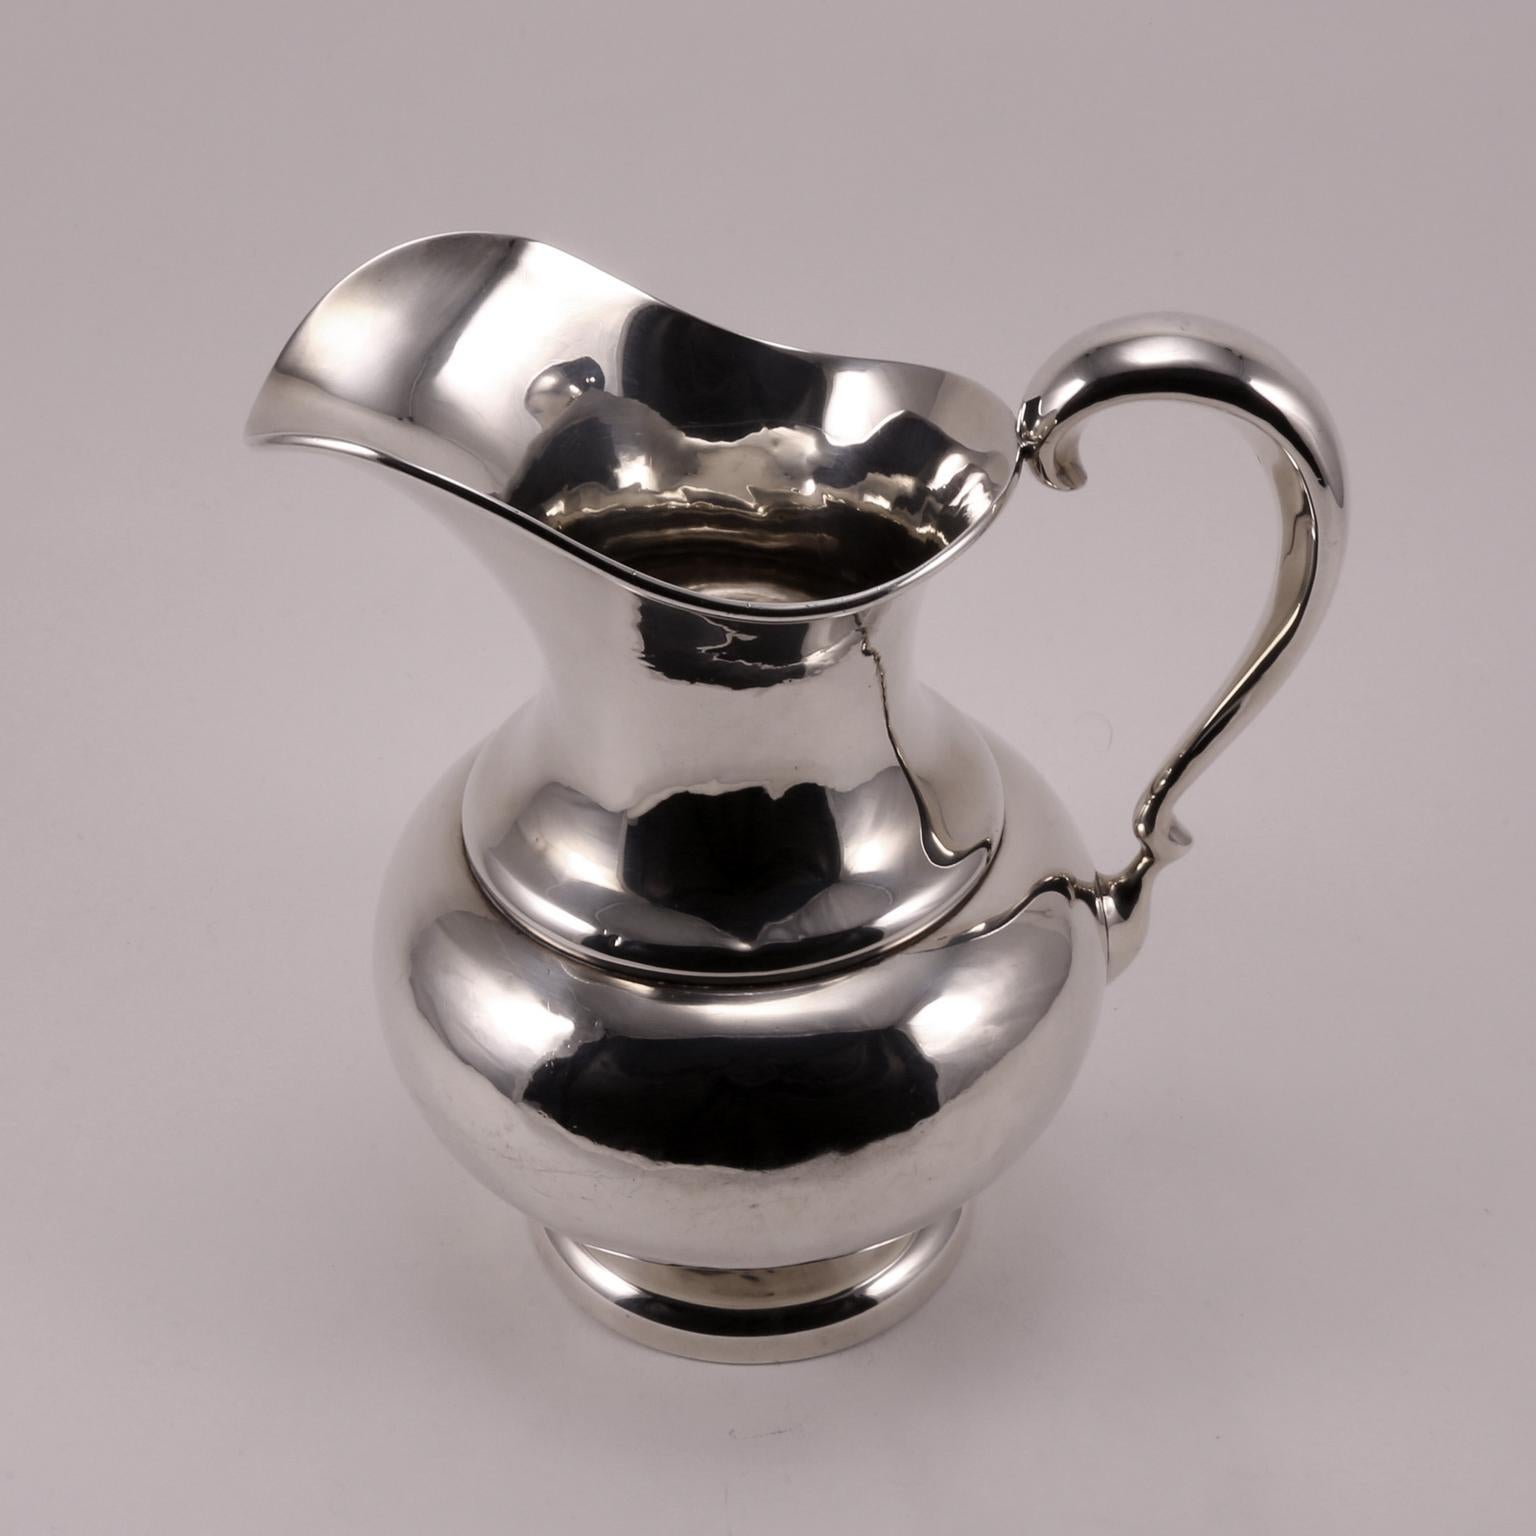 19th Century Mauser Delicate Handcrafted Sterling Silver Jug im Zustand „Gut“ im Angebot in Florence, IT